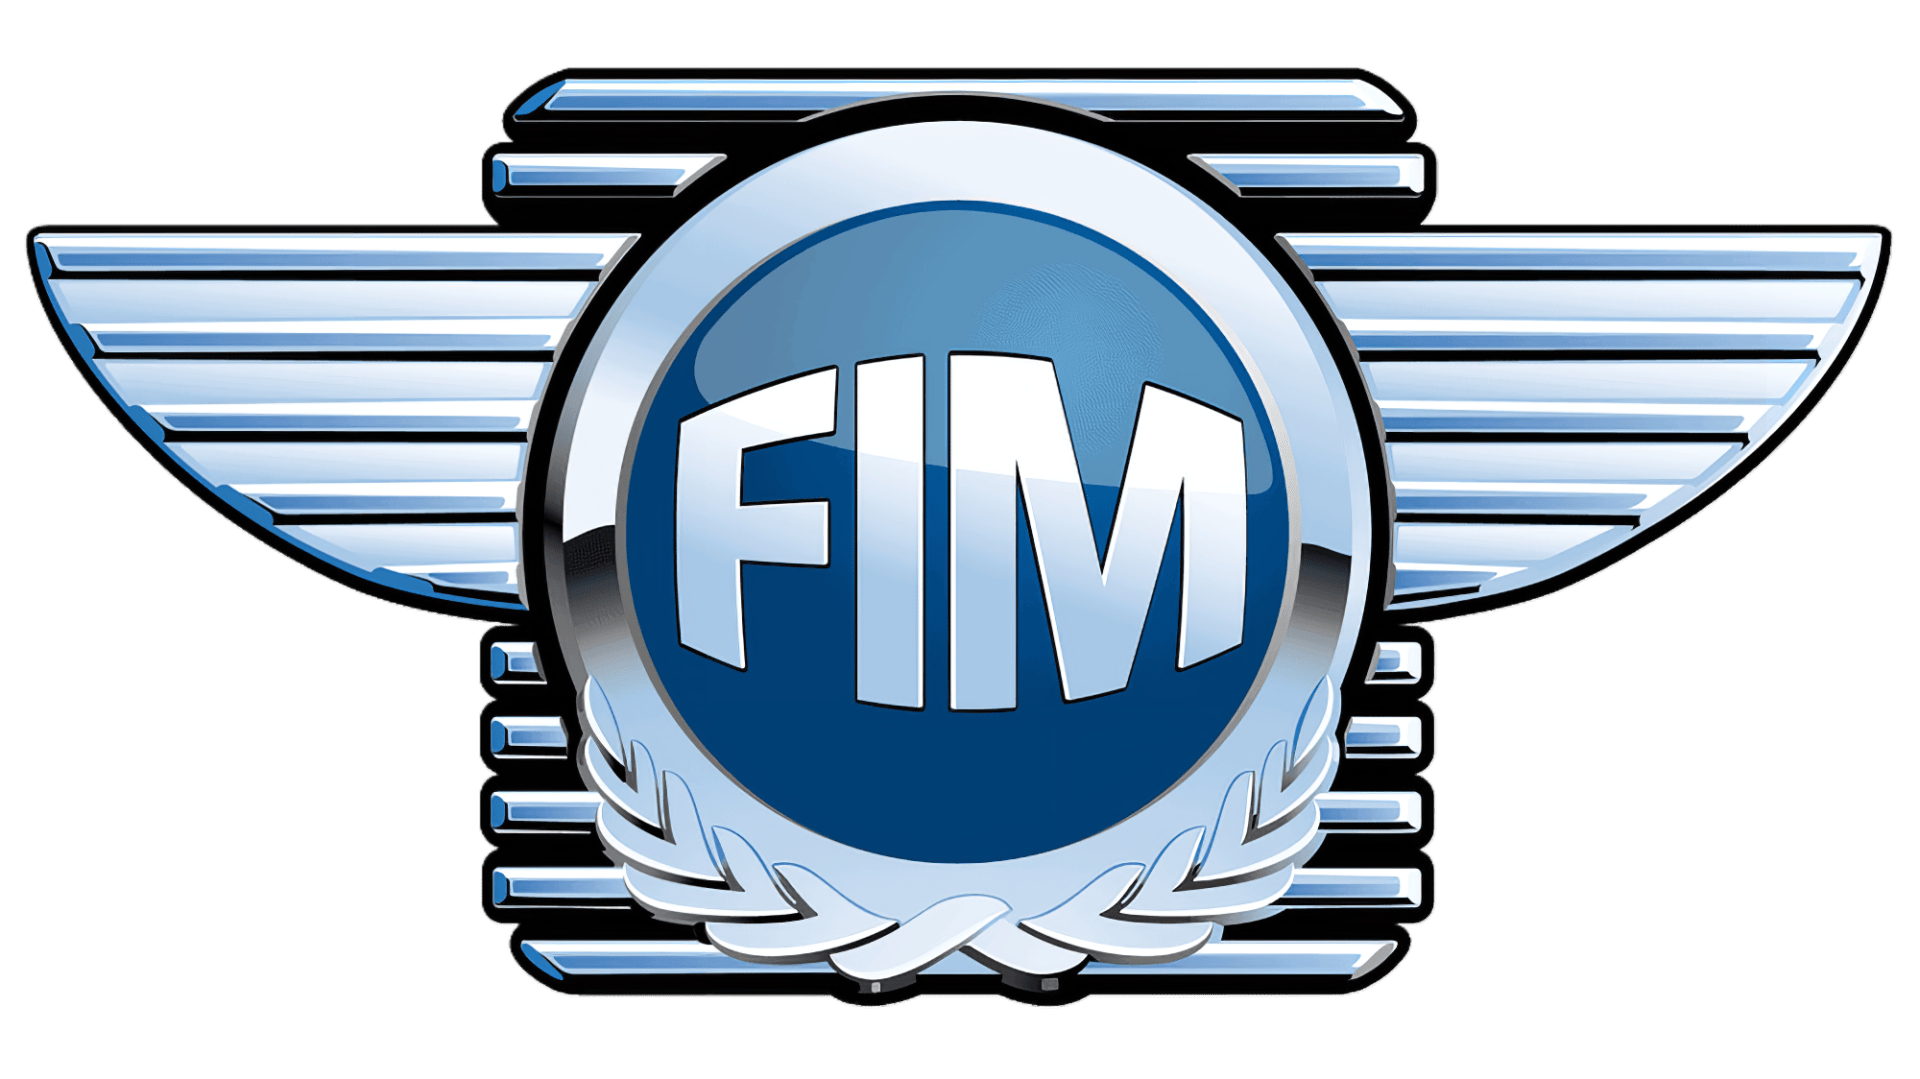 FIM cancels three races due to war in Ukraine
- also in the MOTORCYCLES.NEWS APP